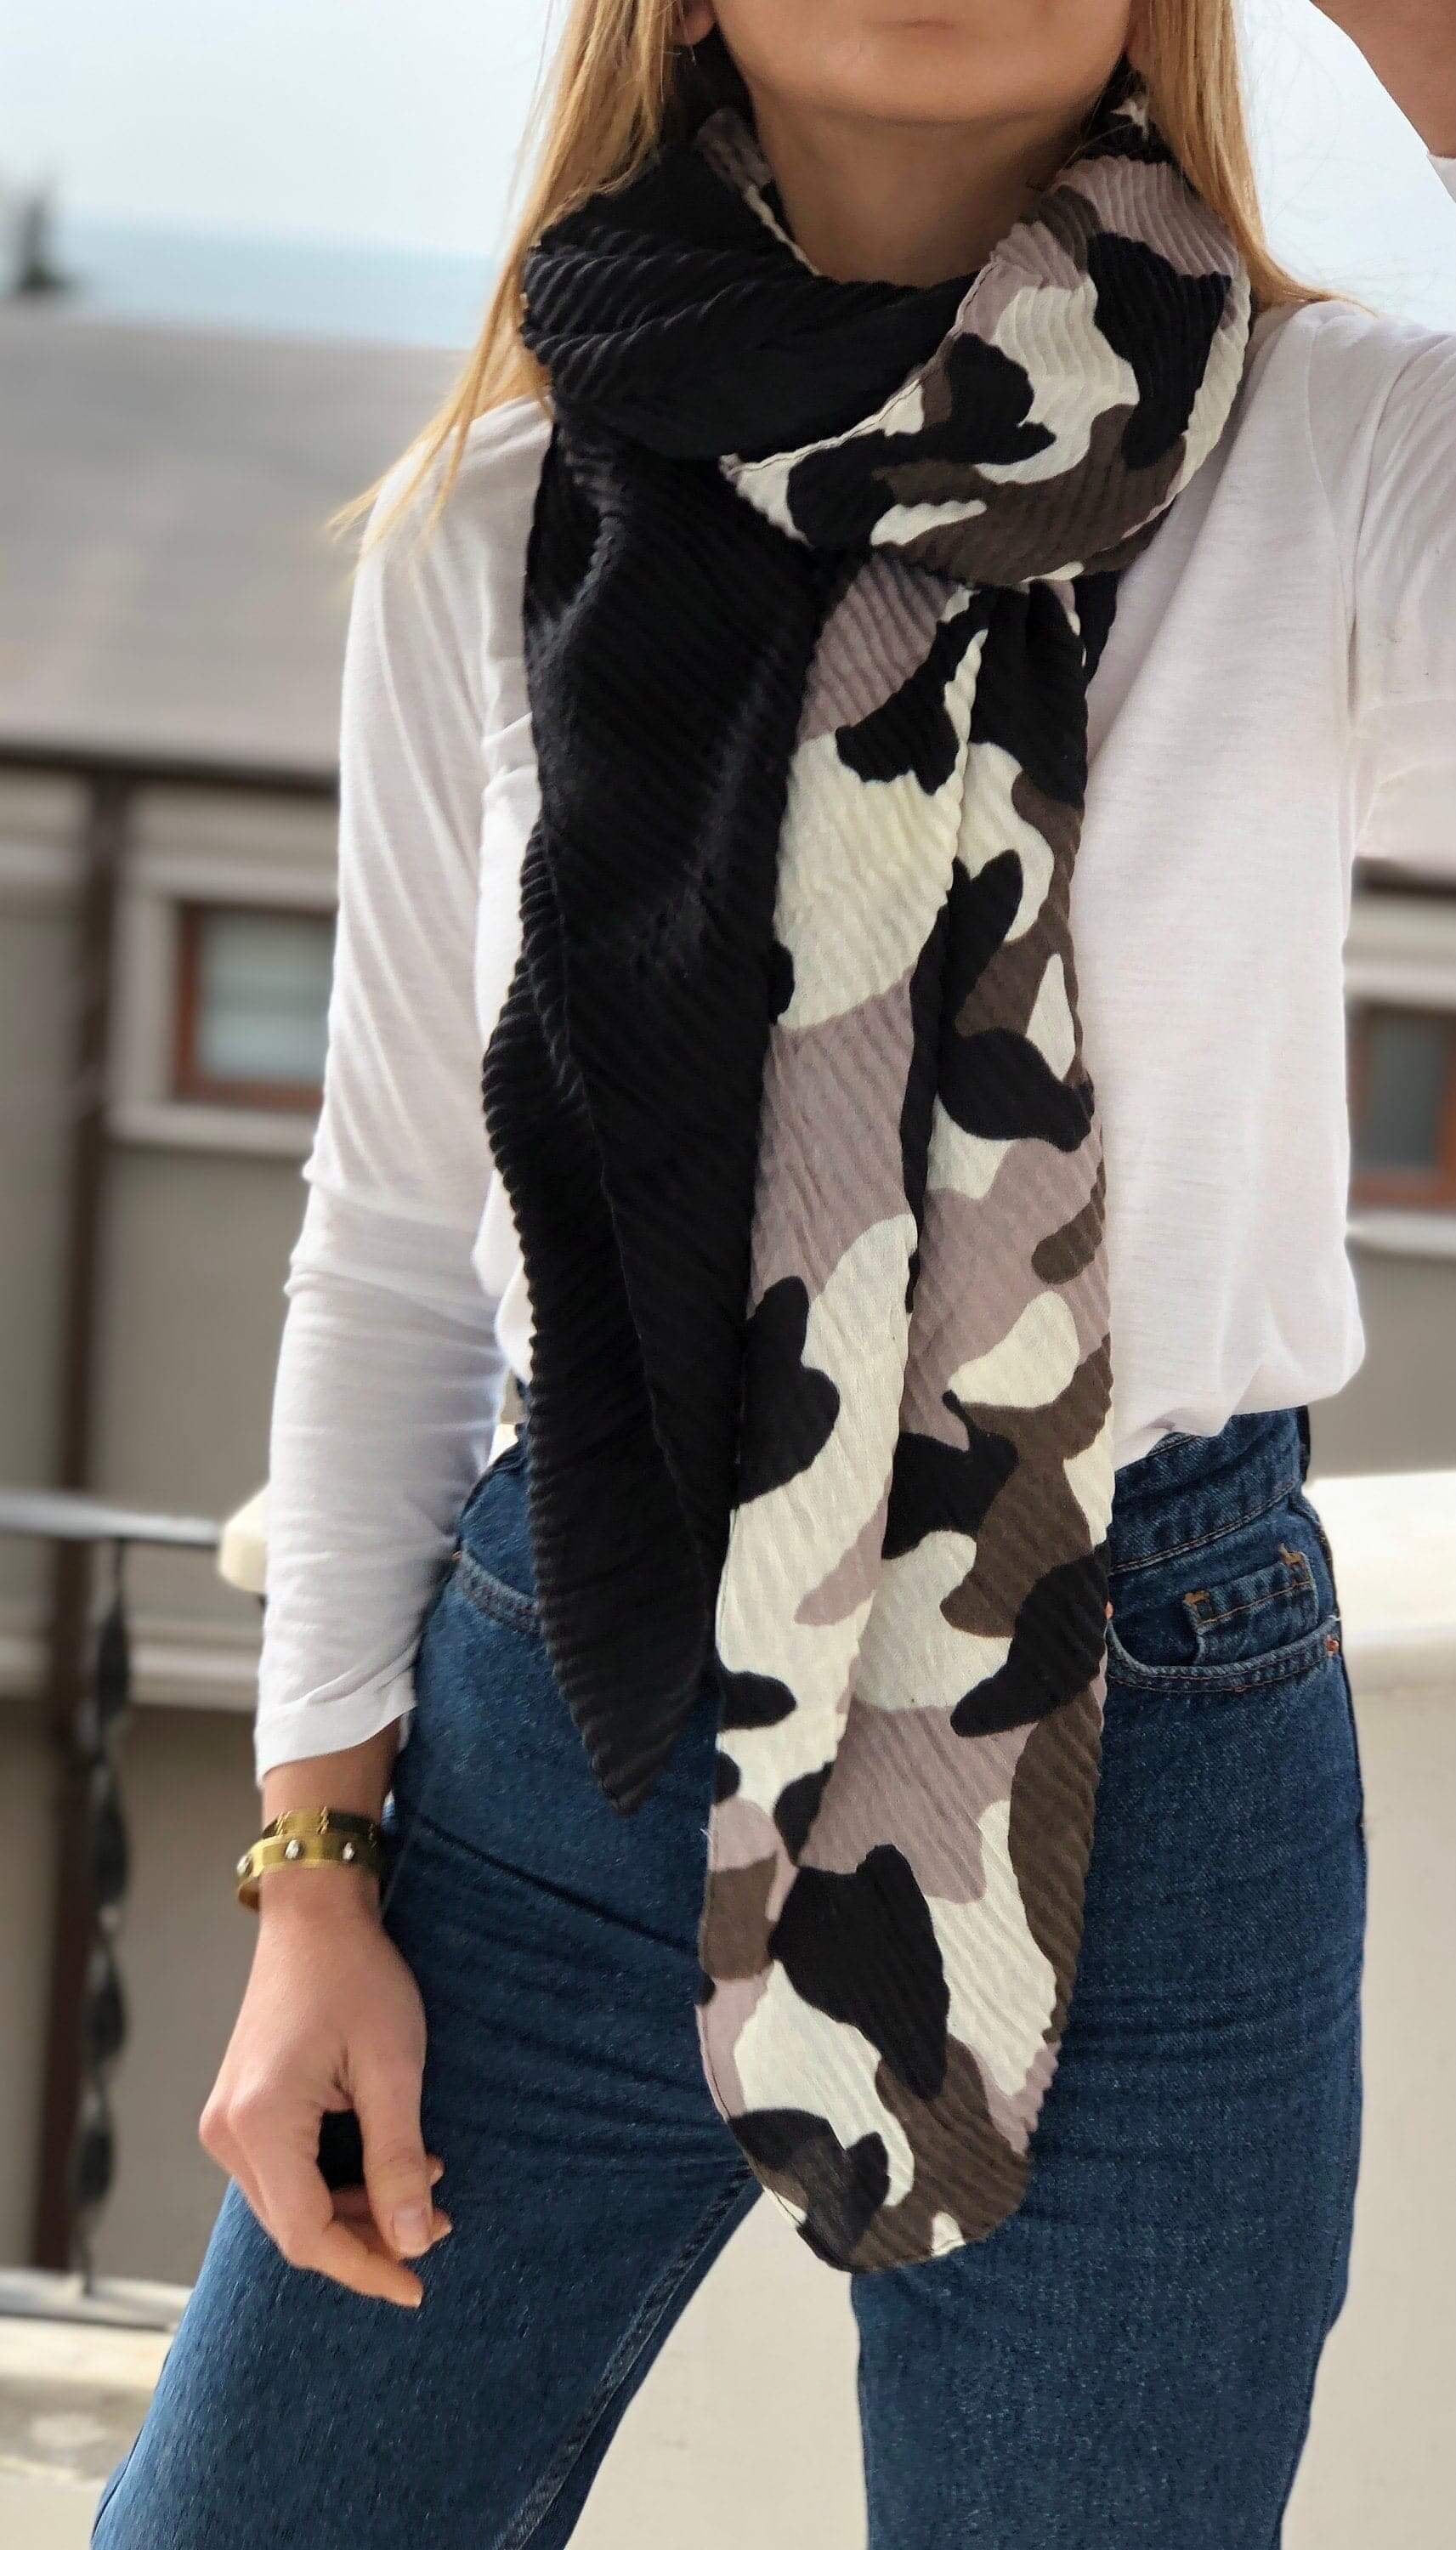 Versatile 100% cotton rectangle scarf in a trendy grey, black and white camouflage pattern.